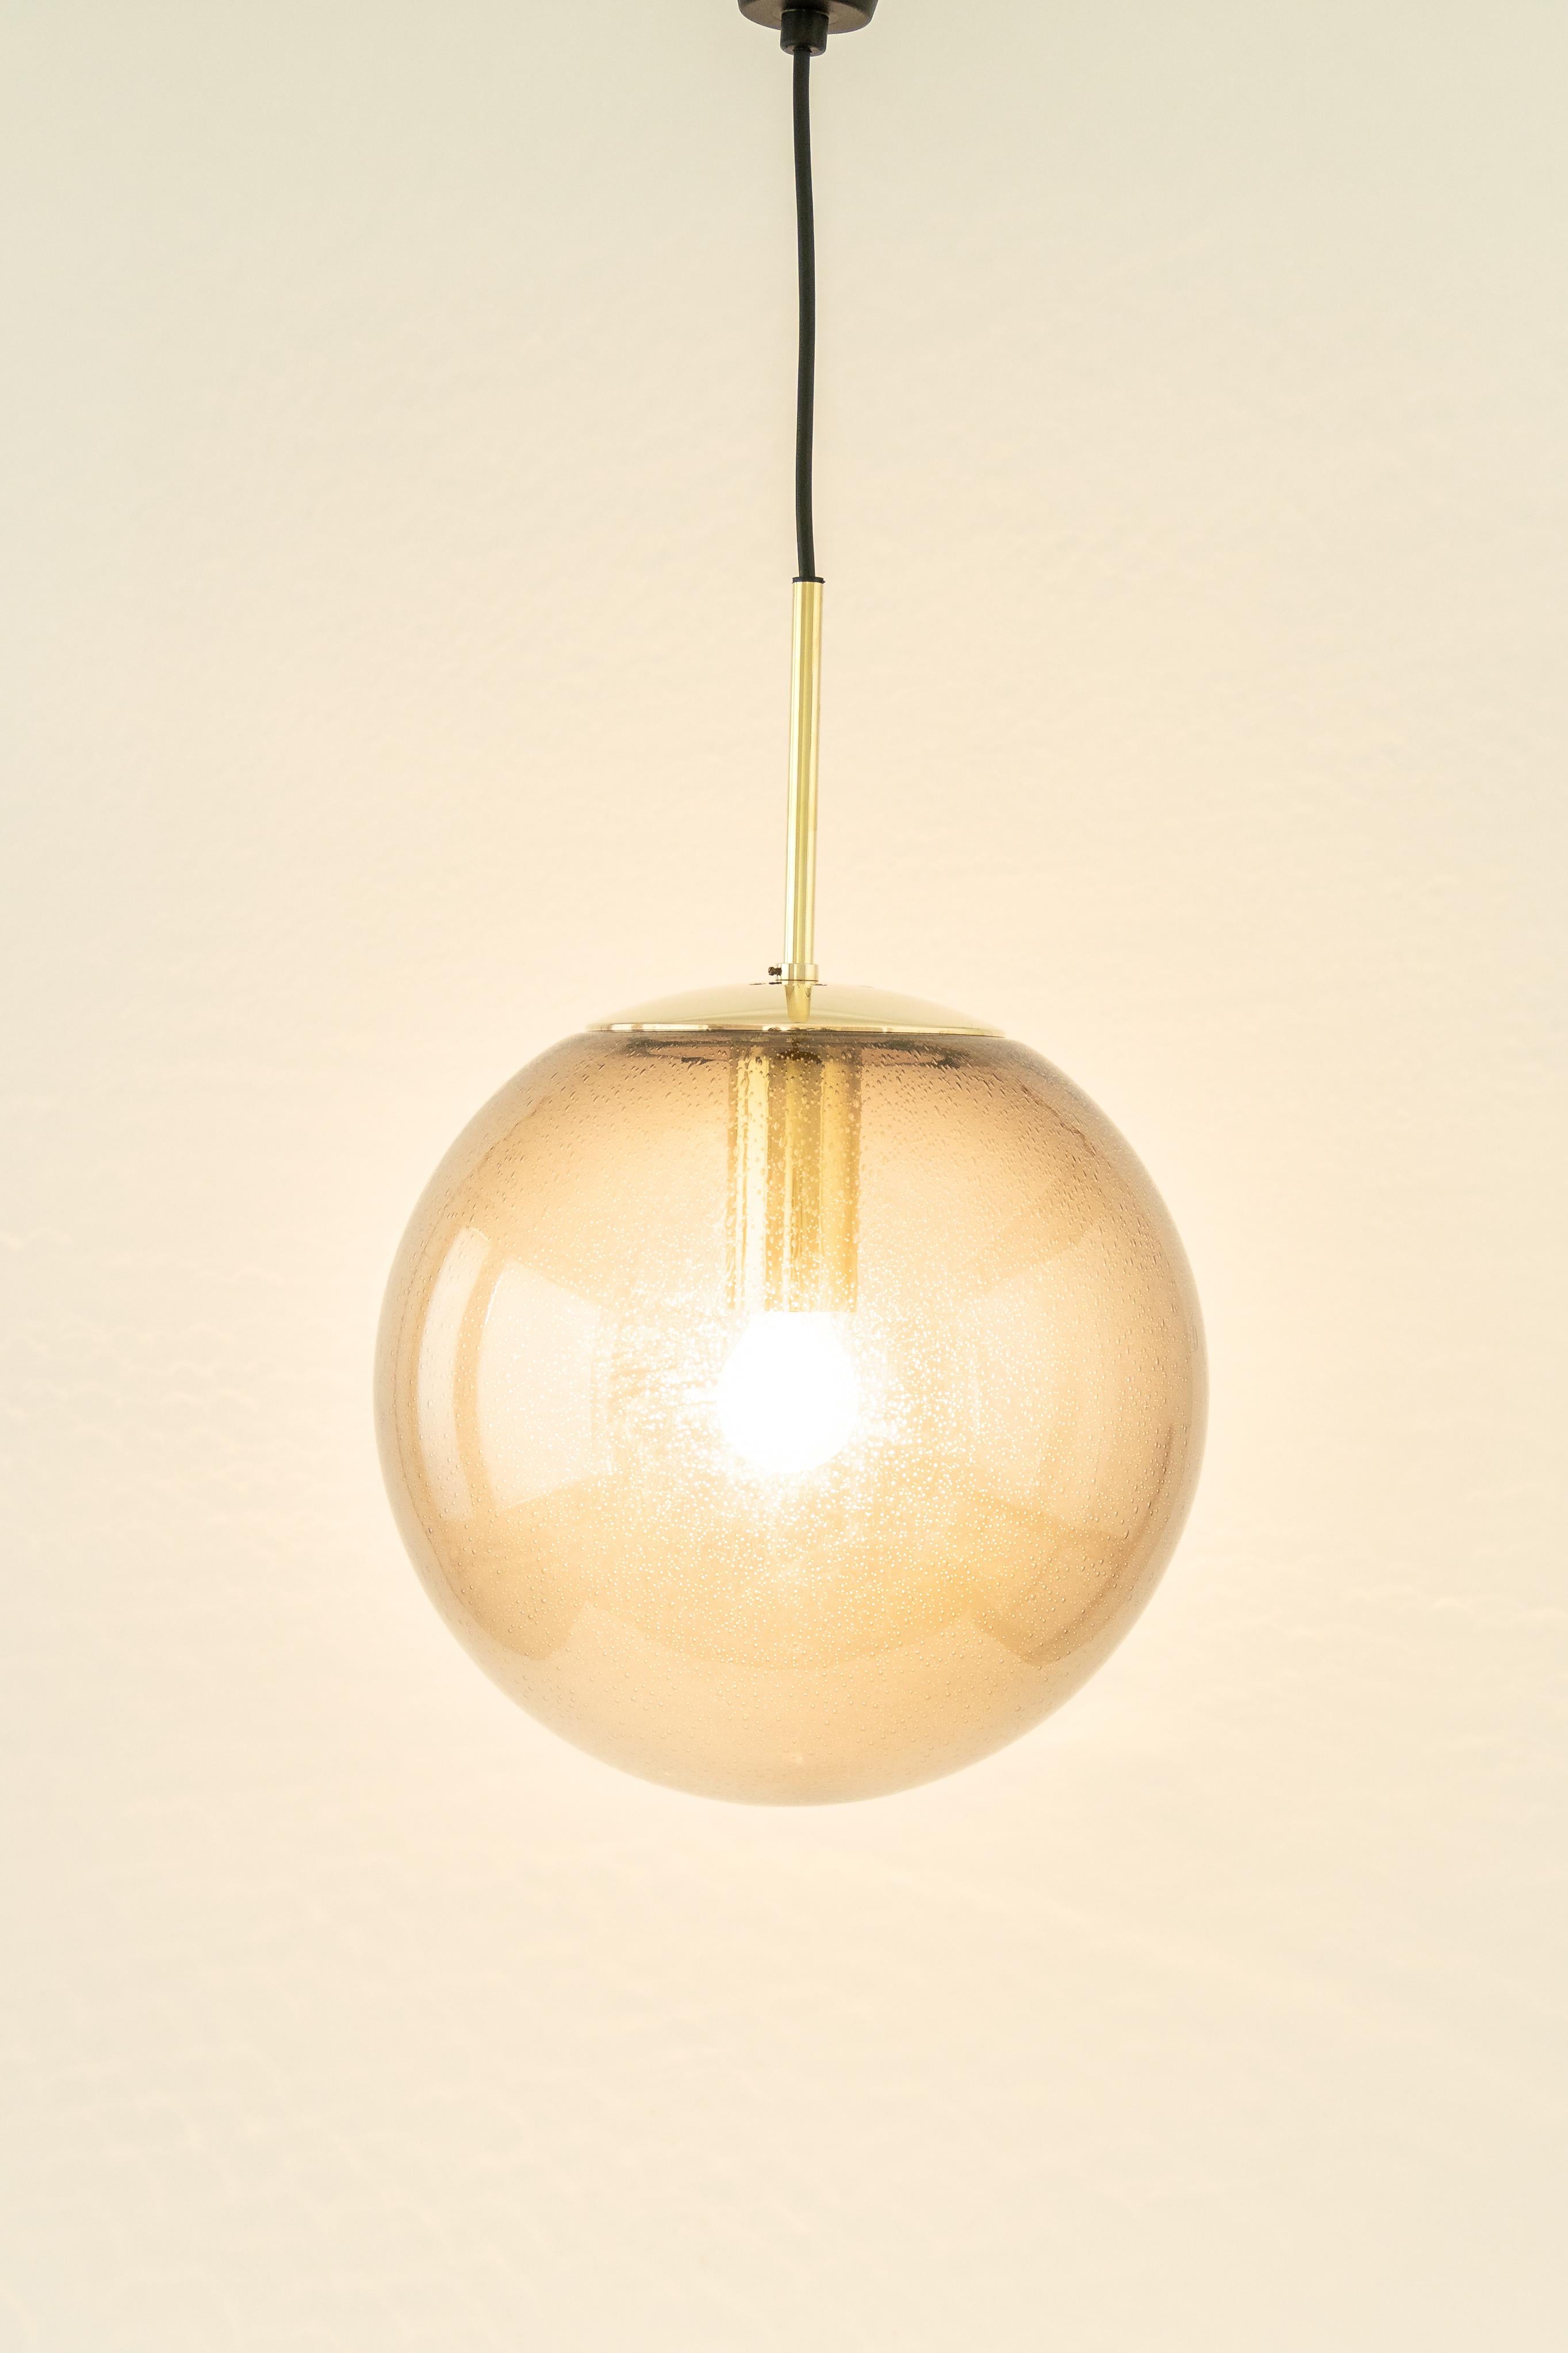 1 of 6 Limburg Brass with Smoked Glass Ball Pendant, Germany, 1970s For Sale 4